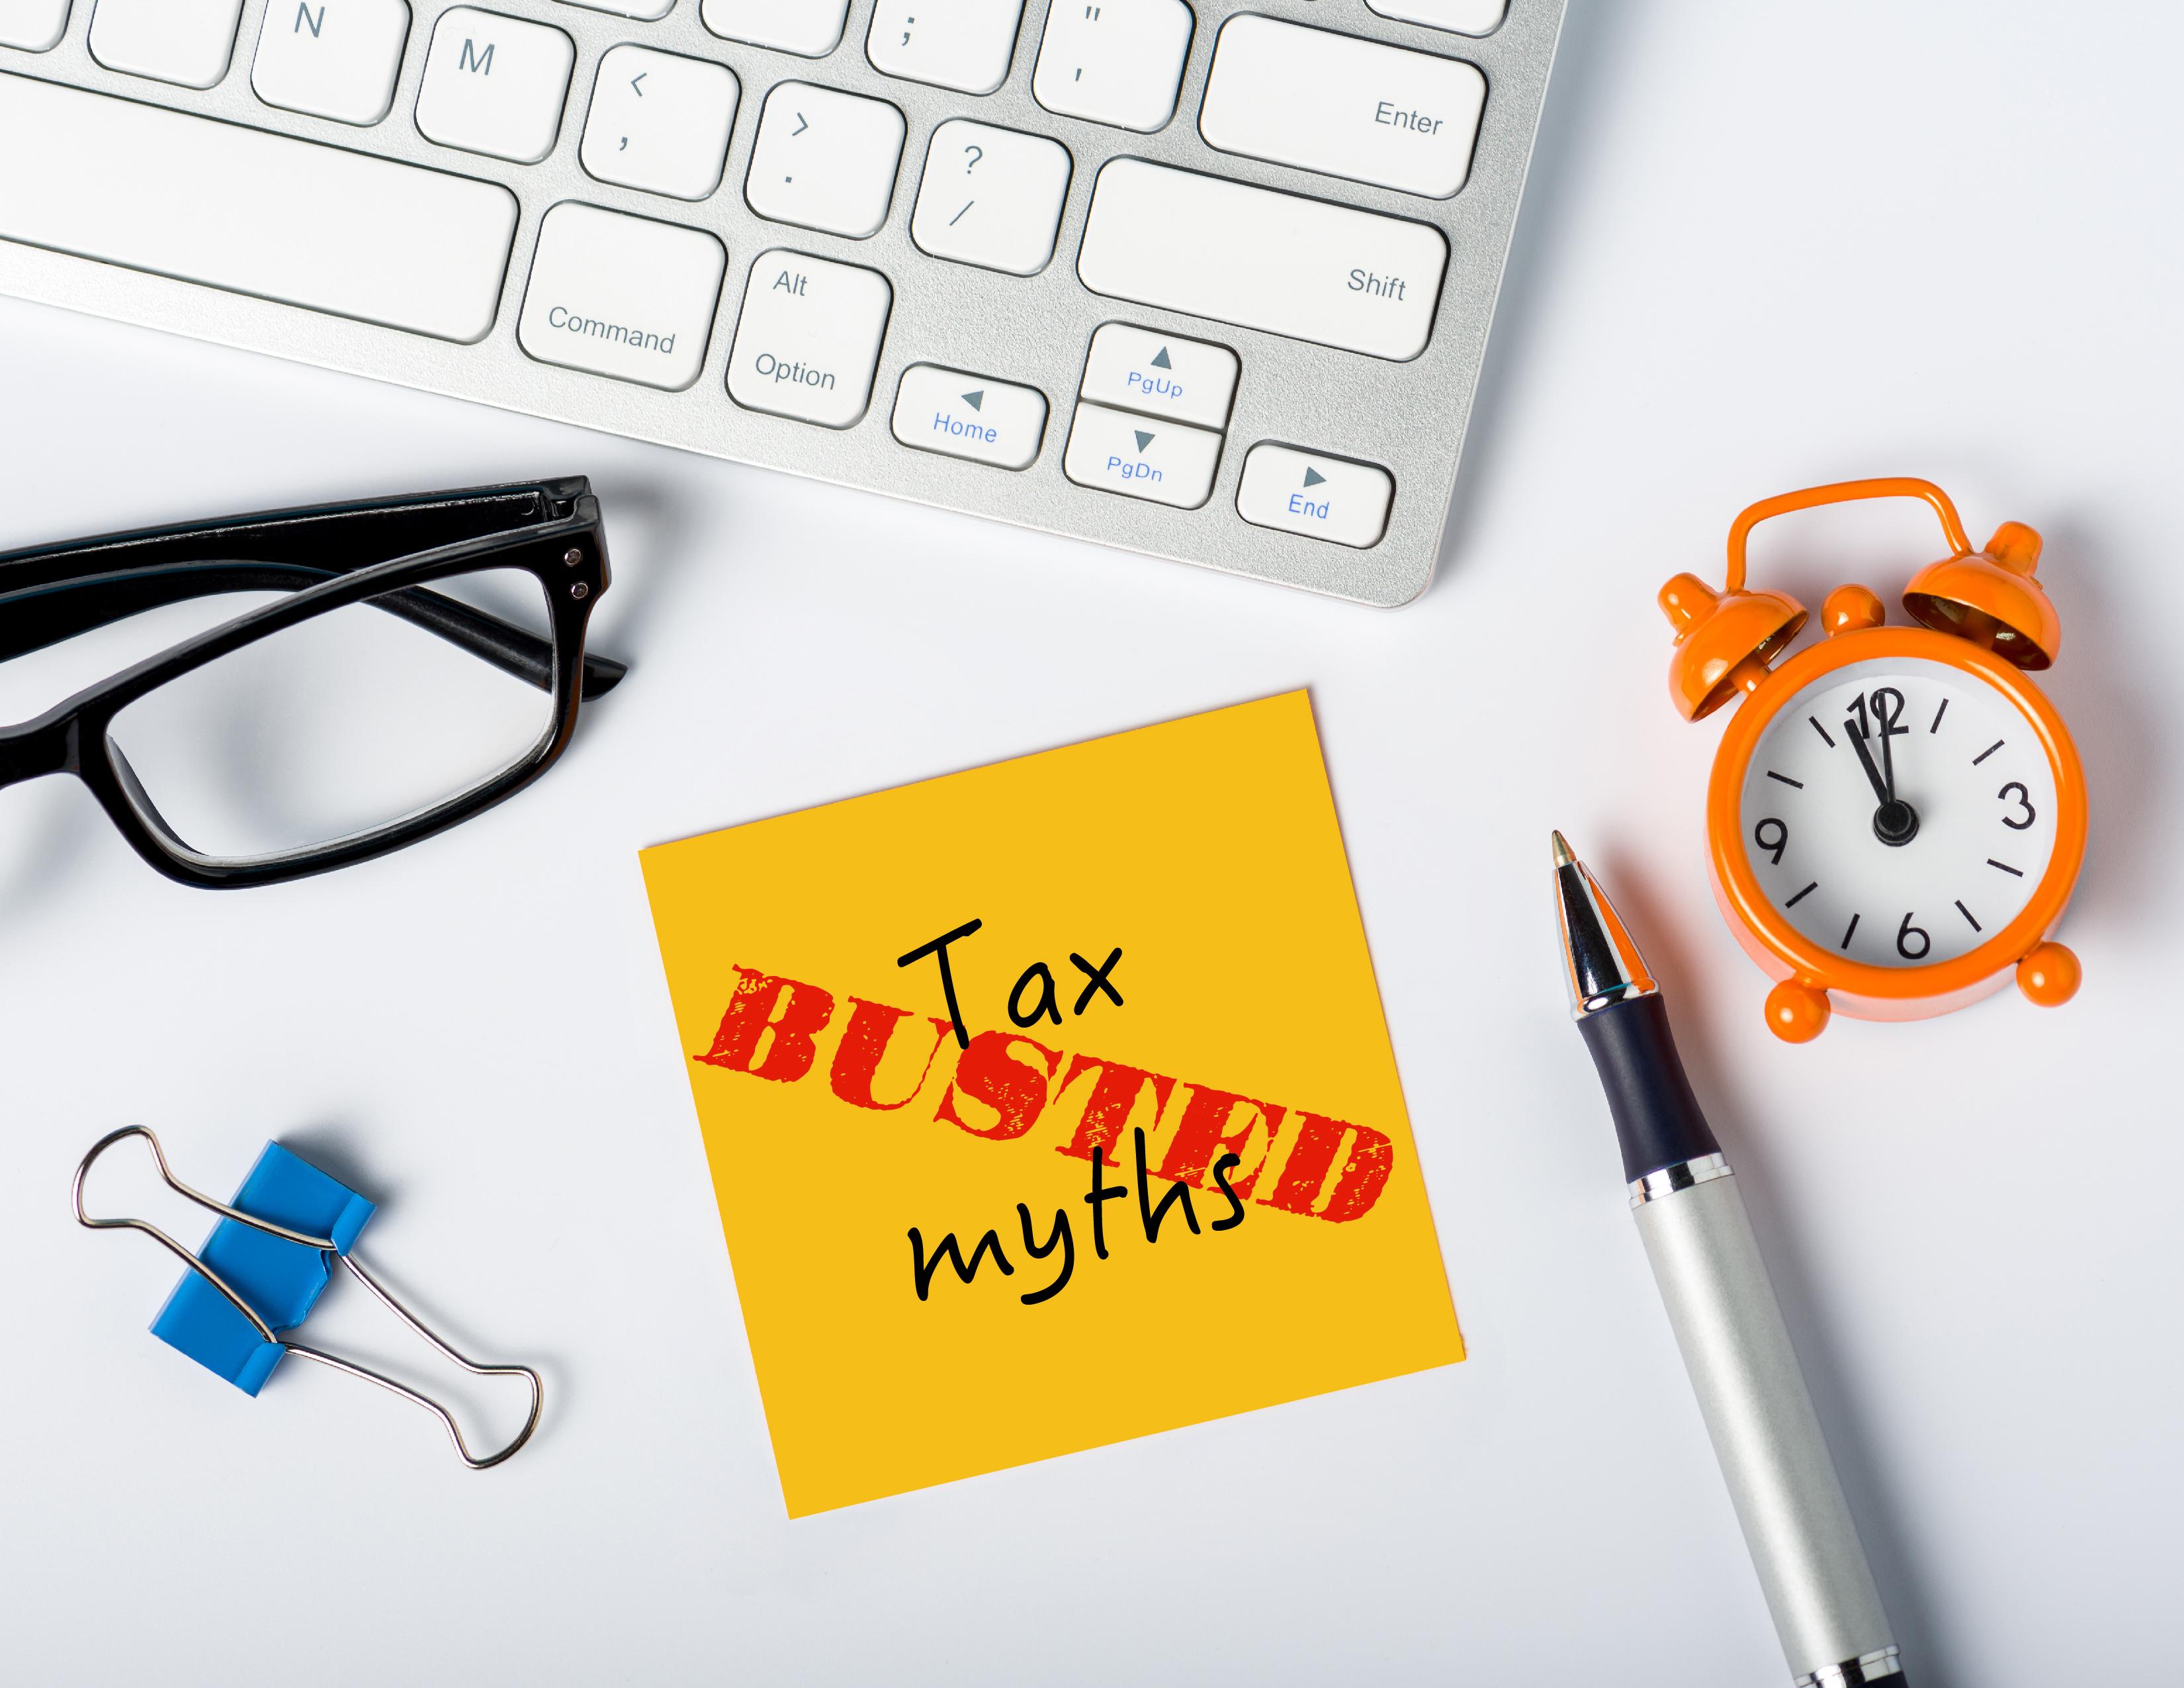 tax myths busted image